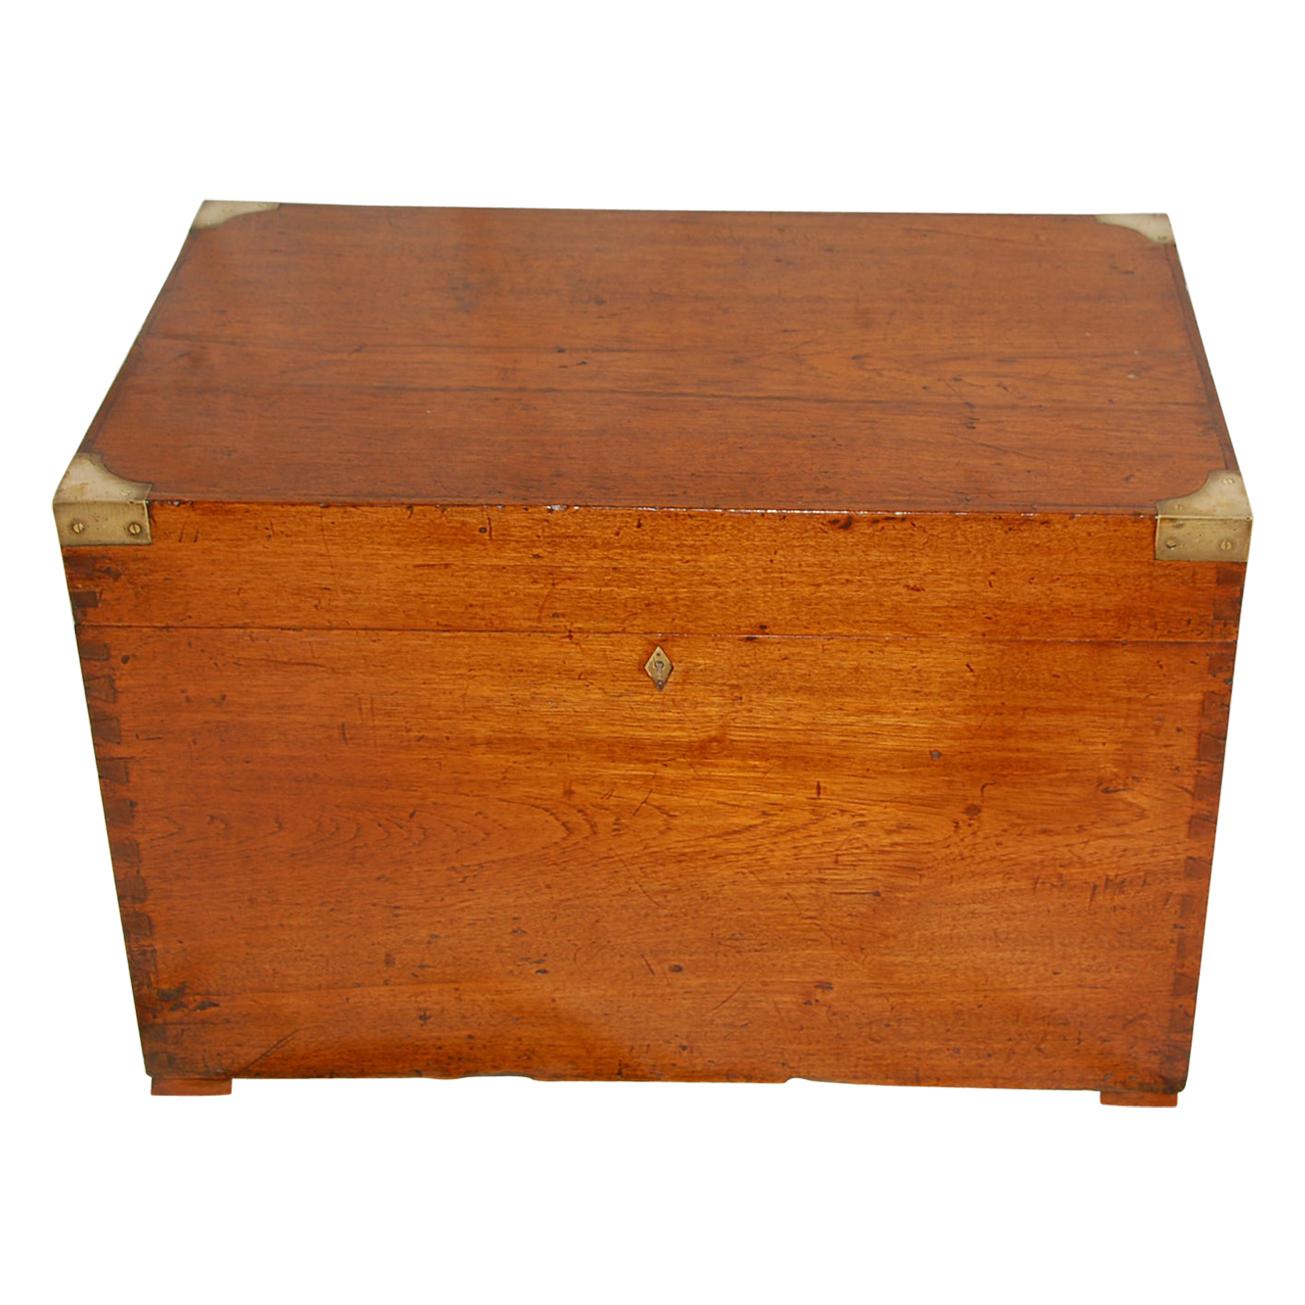 English 19th Century Teak Campaign Trunk with Brass Corners and Handles